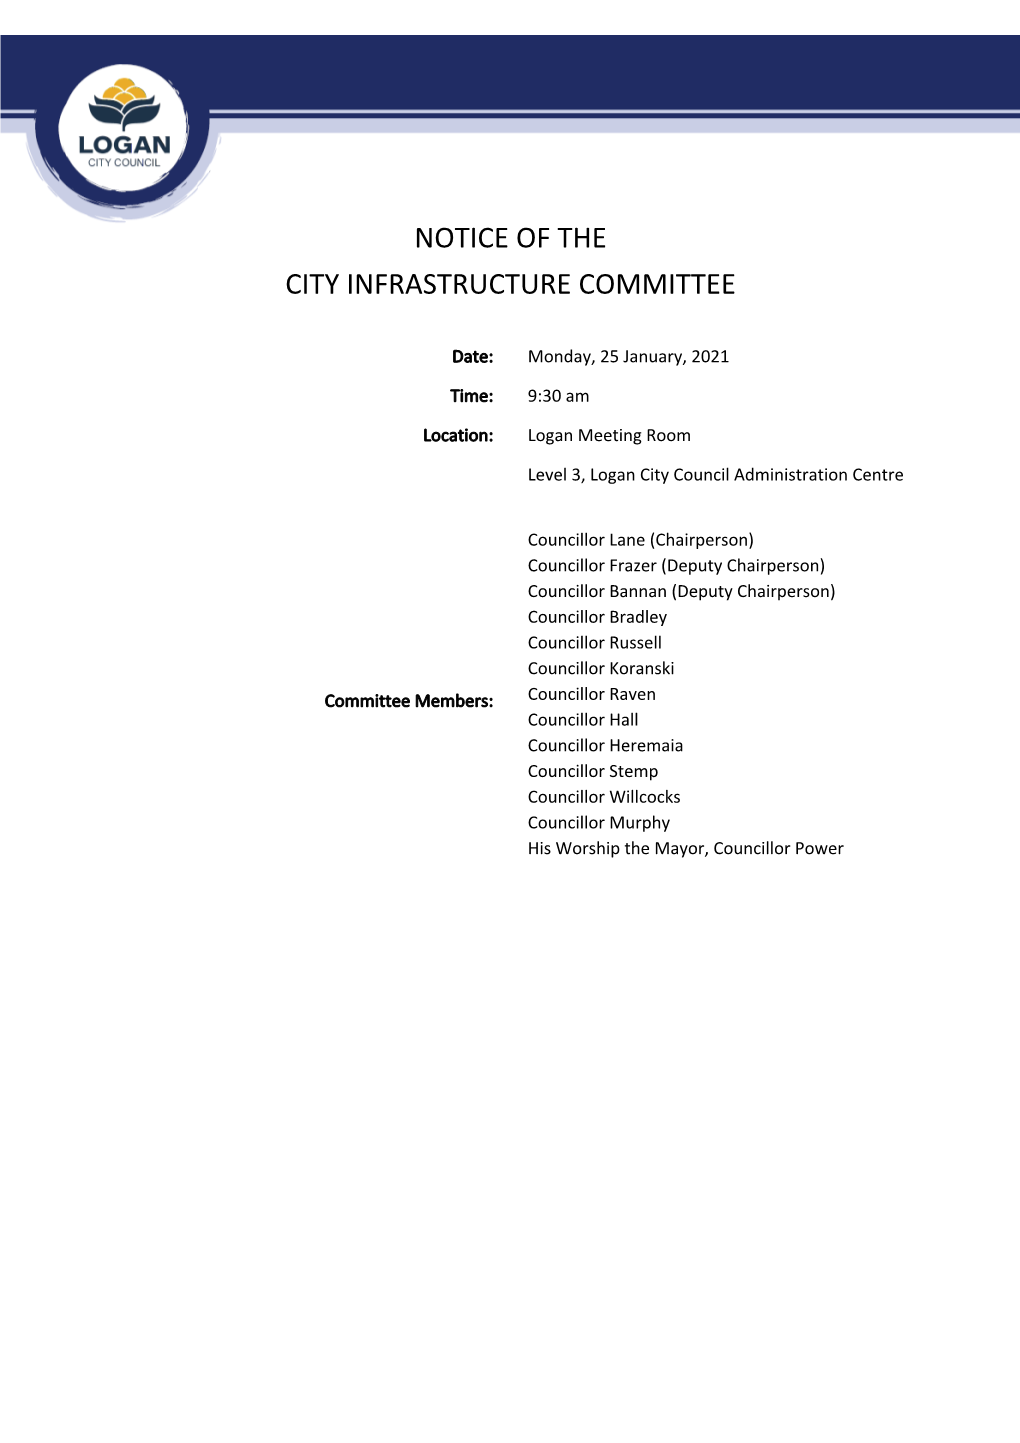 Notice of the City Infrastructure Committee